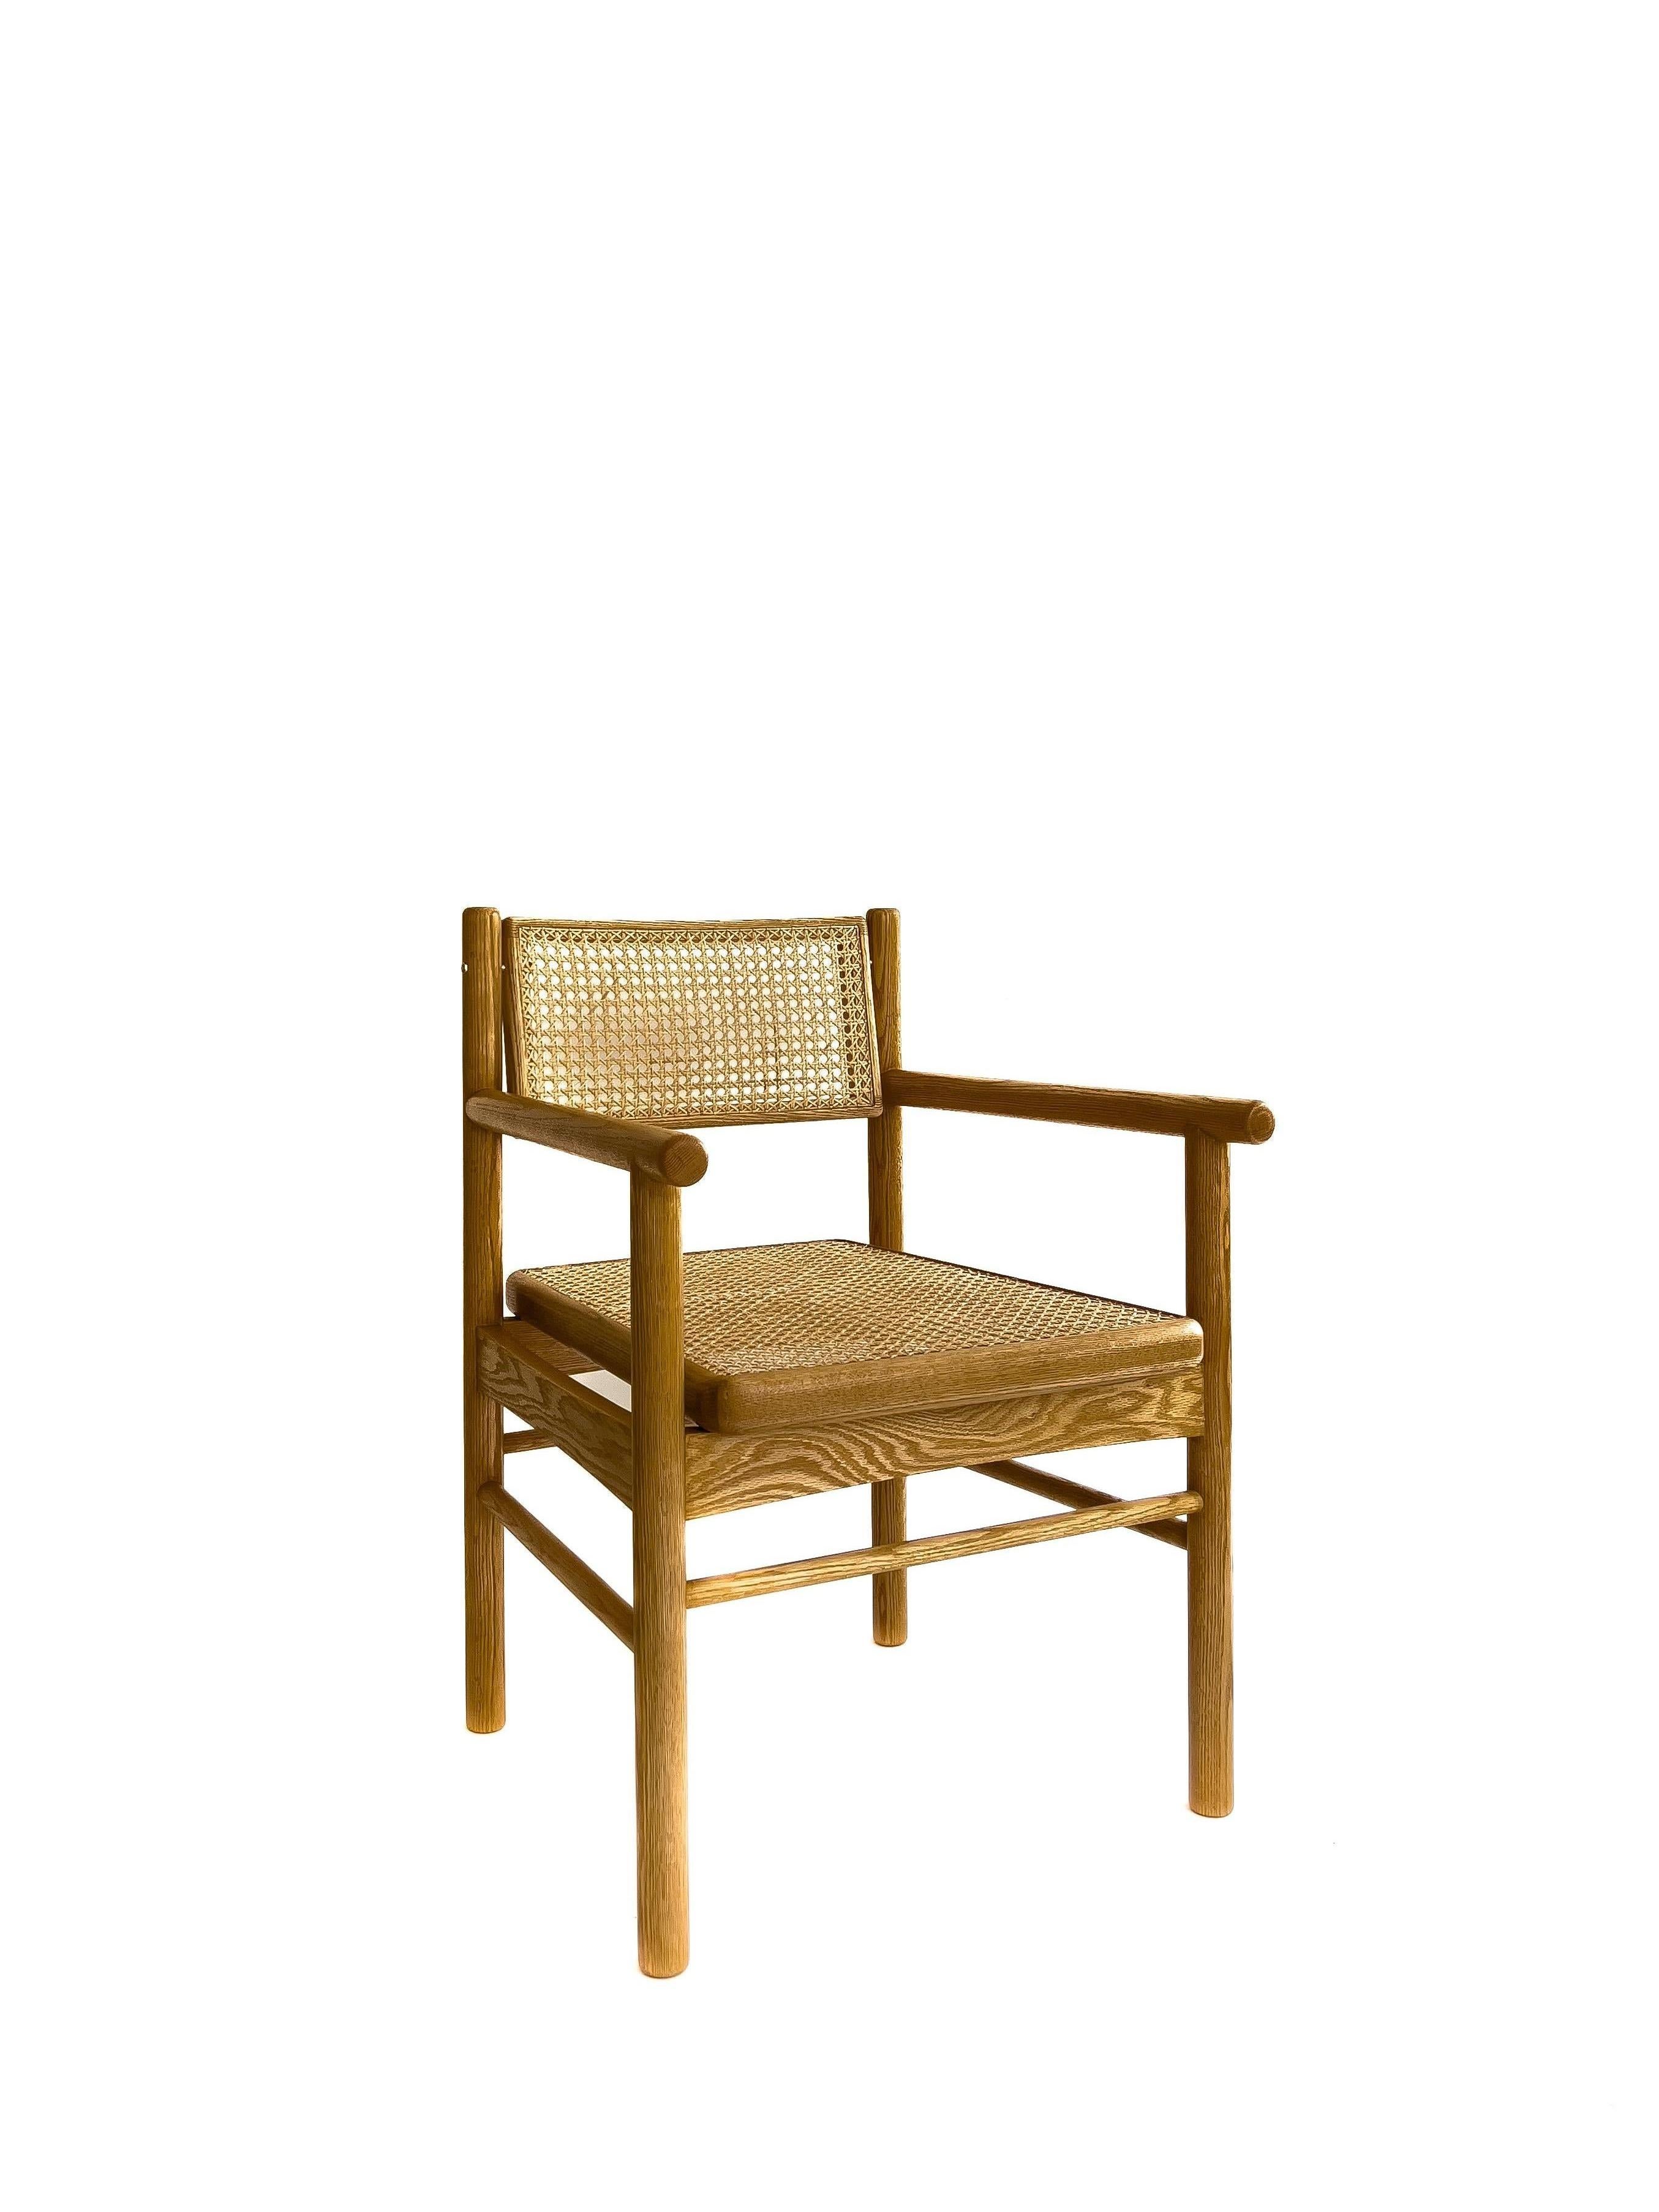 The Mr. Cane chair is an architectural piece that is versatile and comfortable to utilize.
Mr. Cane is a solid wood chair with a traditionally hand-caned seat and swivel backrest.
The swivel back is made adjustable using our newly designed and